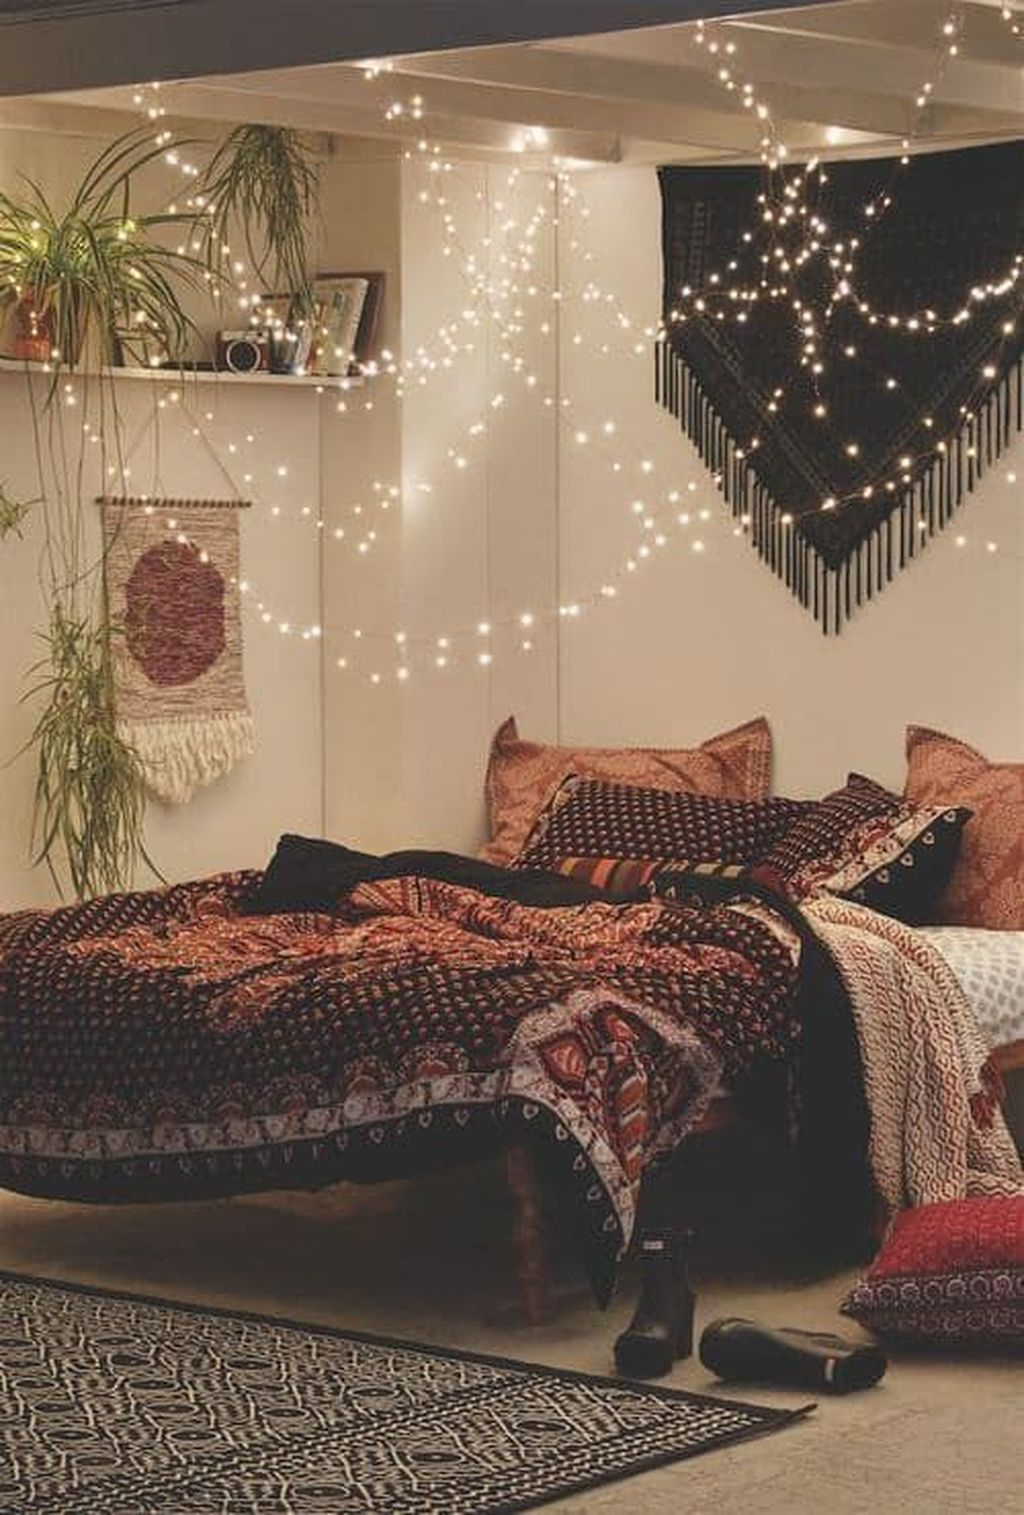 Admiring Bedroom Decor Ideas To Have Right Now 14